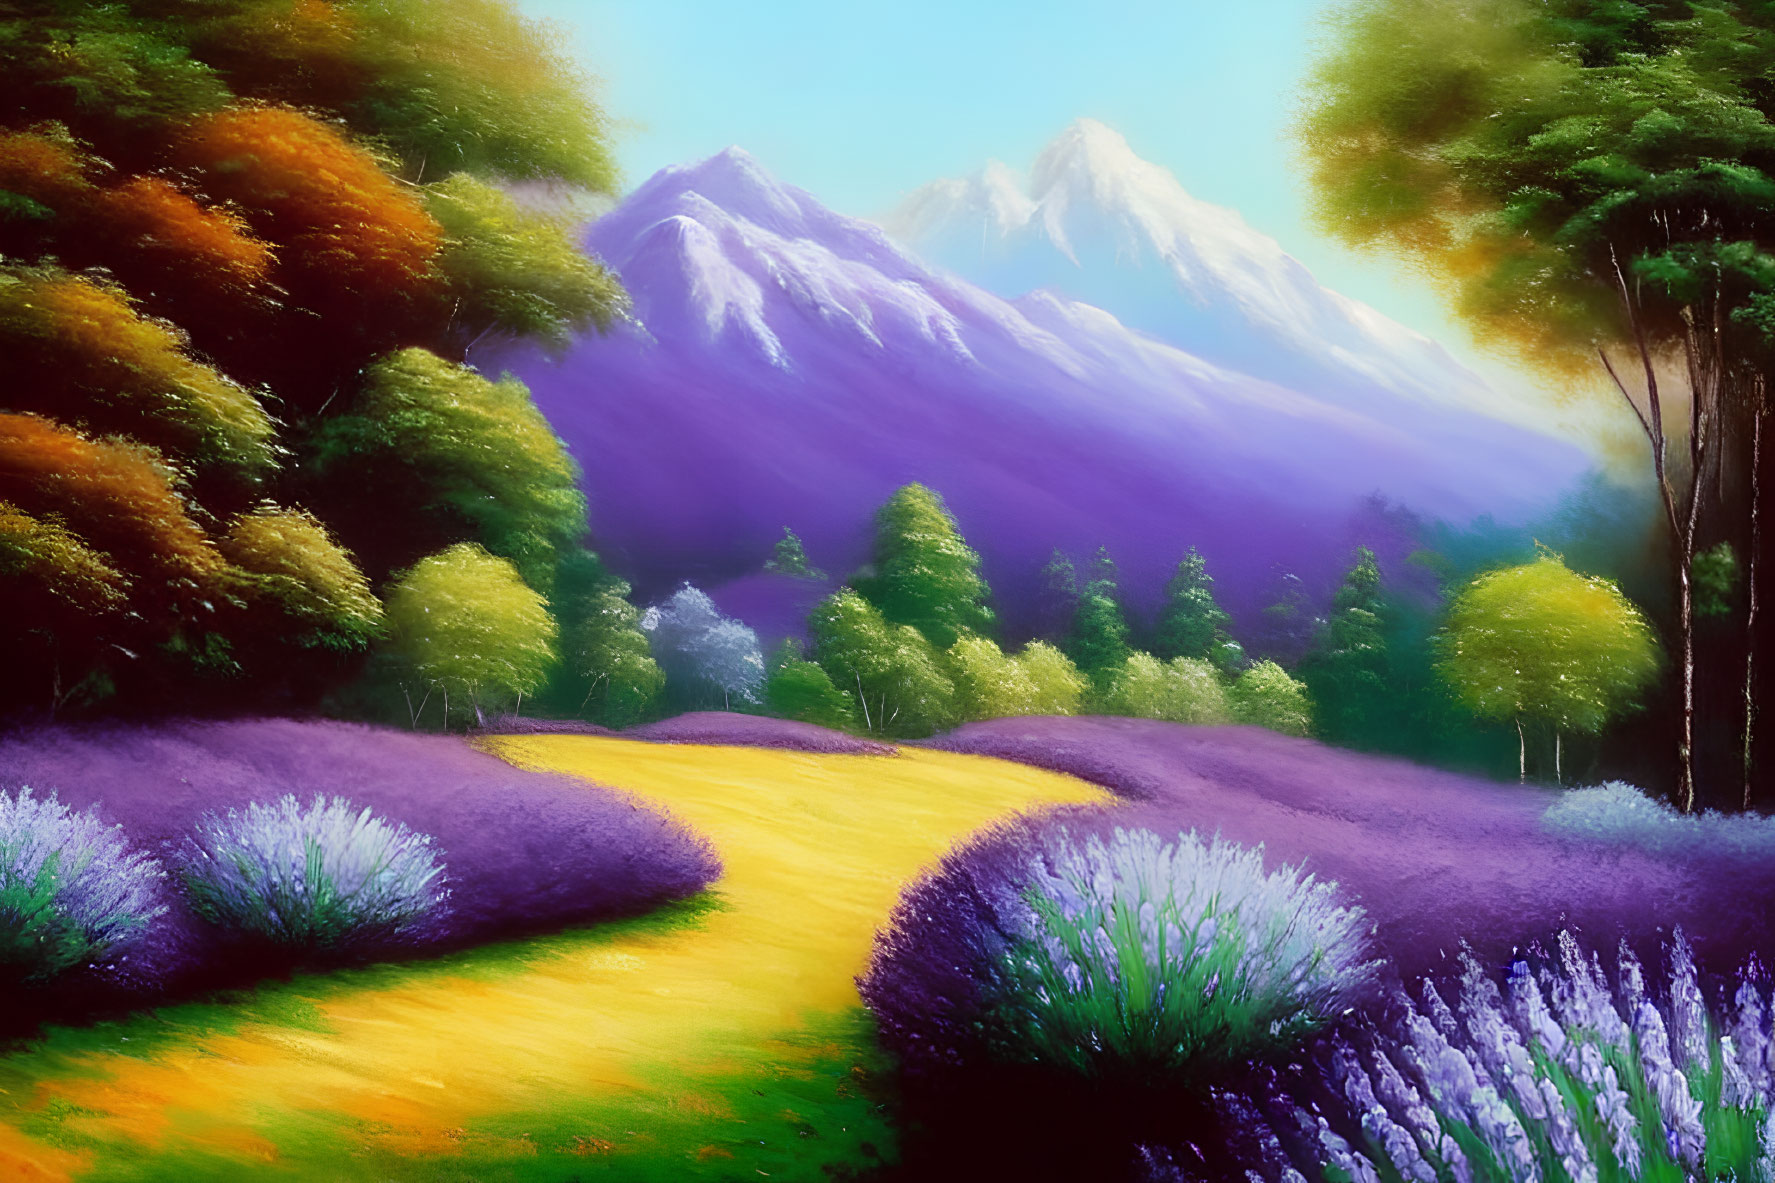 Lavender fields, forest, and mountains in vibrant landscape painting